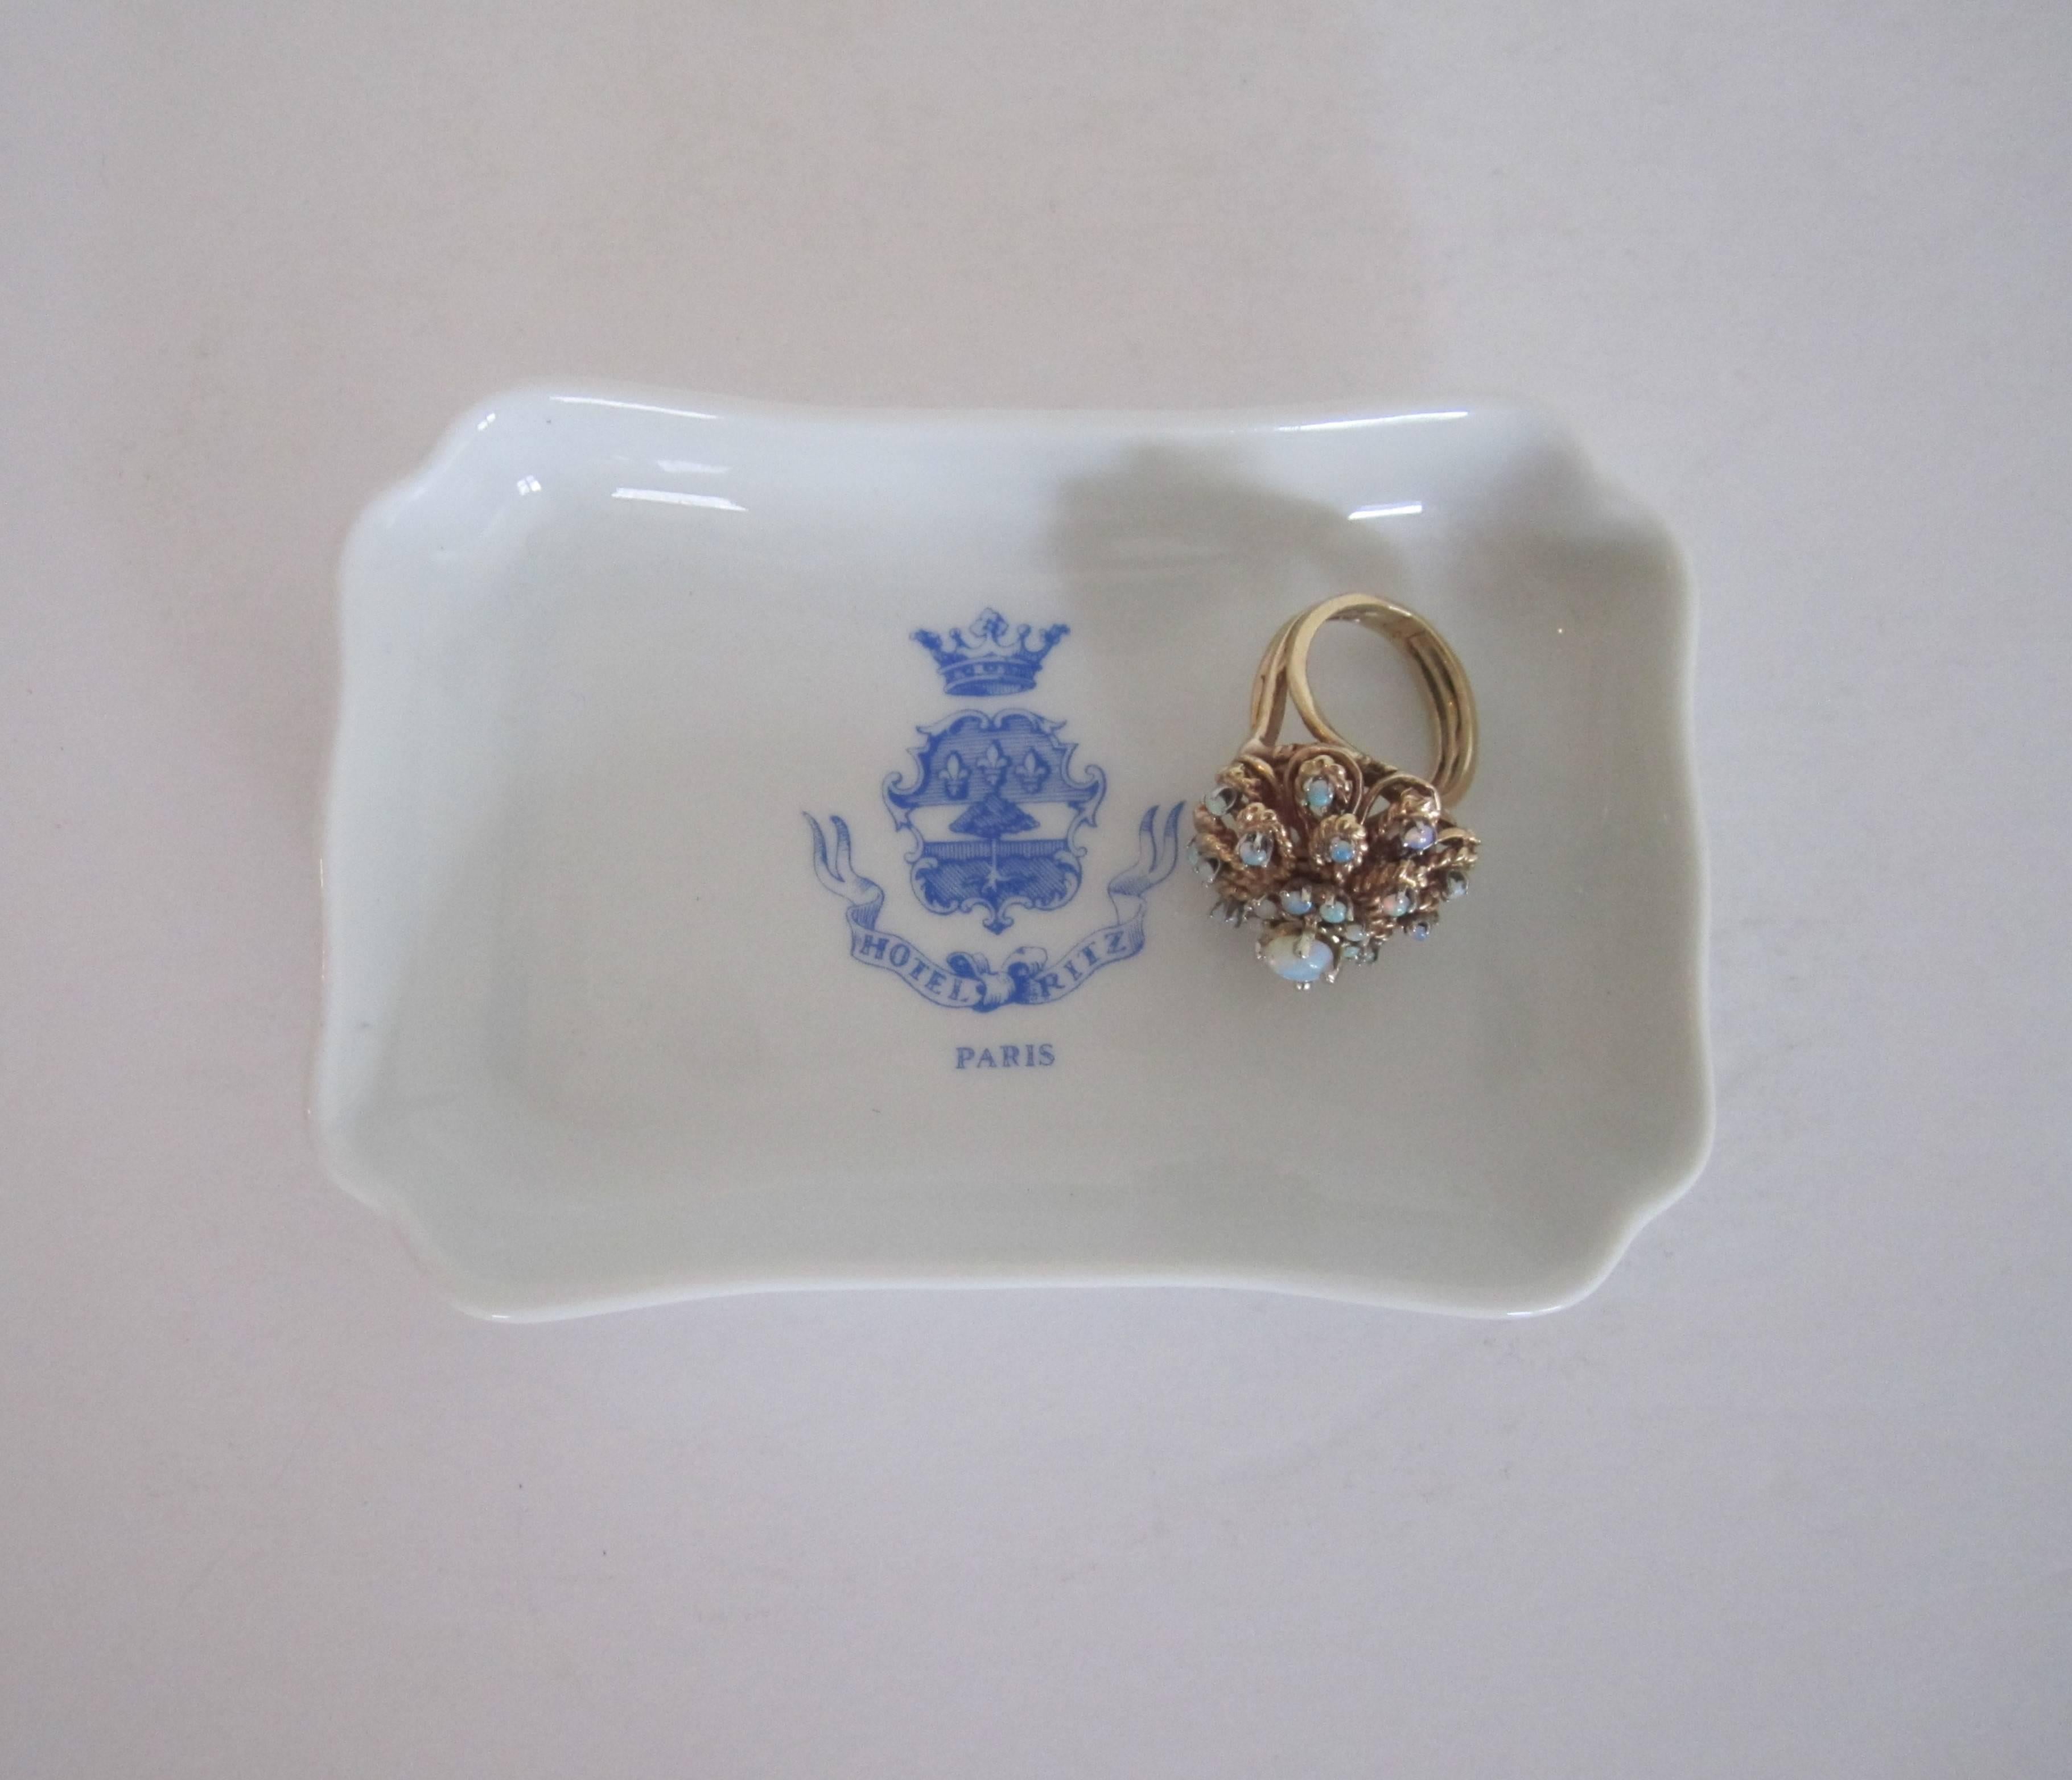 French Hotel Ritz Paris Blue and White Limoges Porcelain Jewelry Dish, France